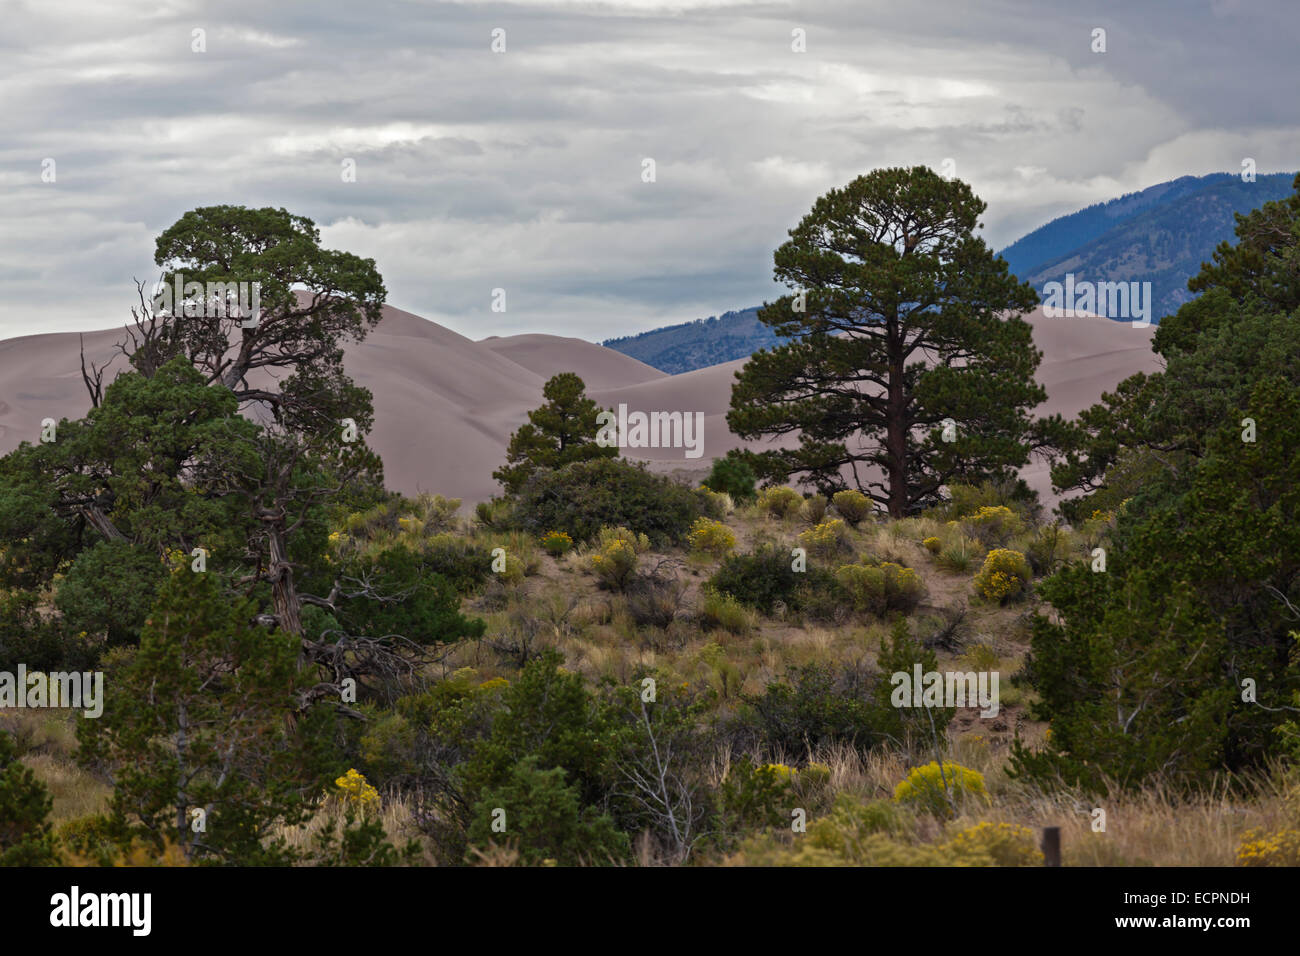 PINON PINES at GREAT SAND DUNES NATIONAL PARK which are part of the ROCKIES - COLORADO Stock Photo